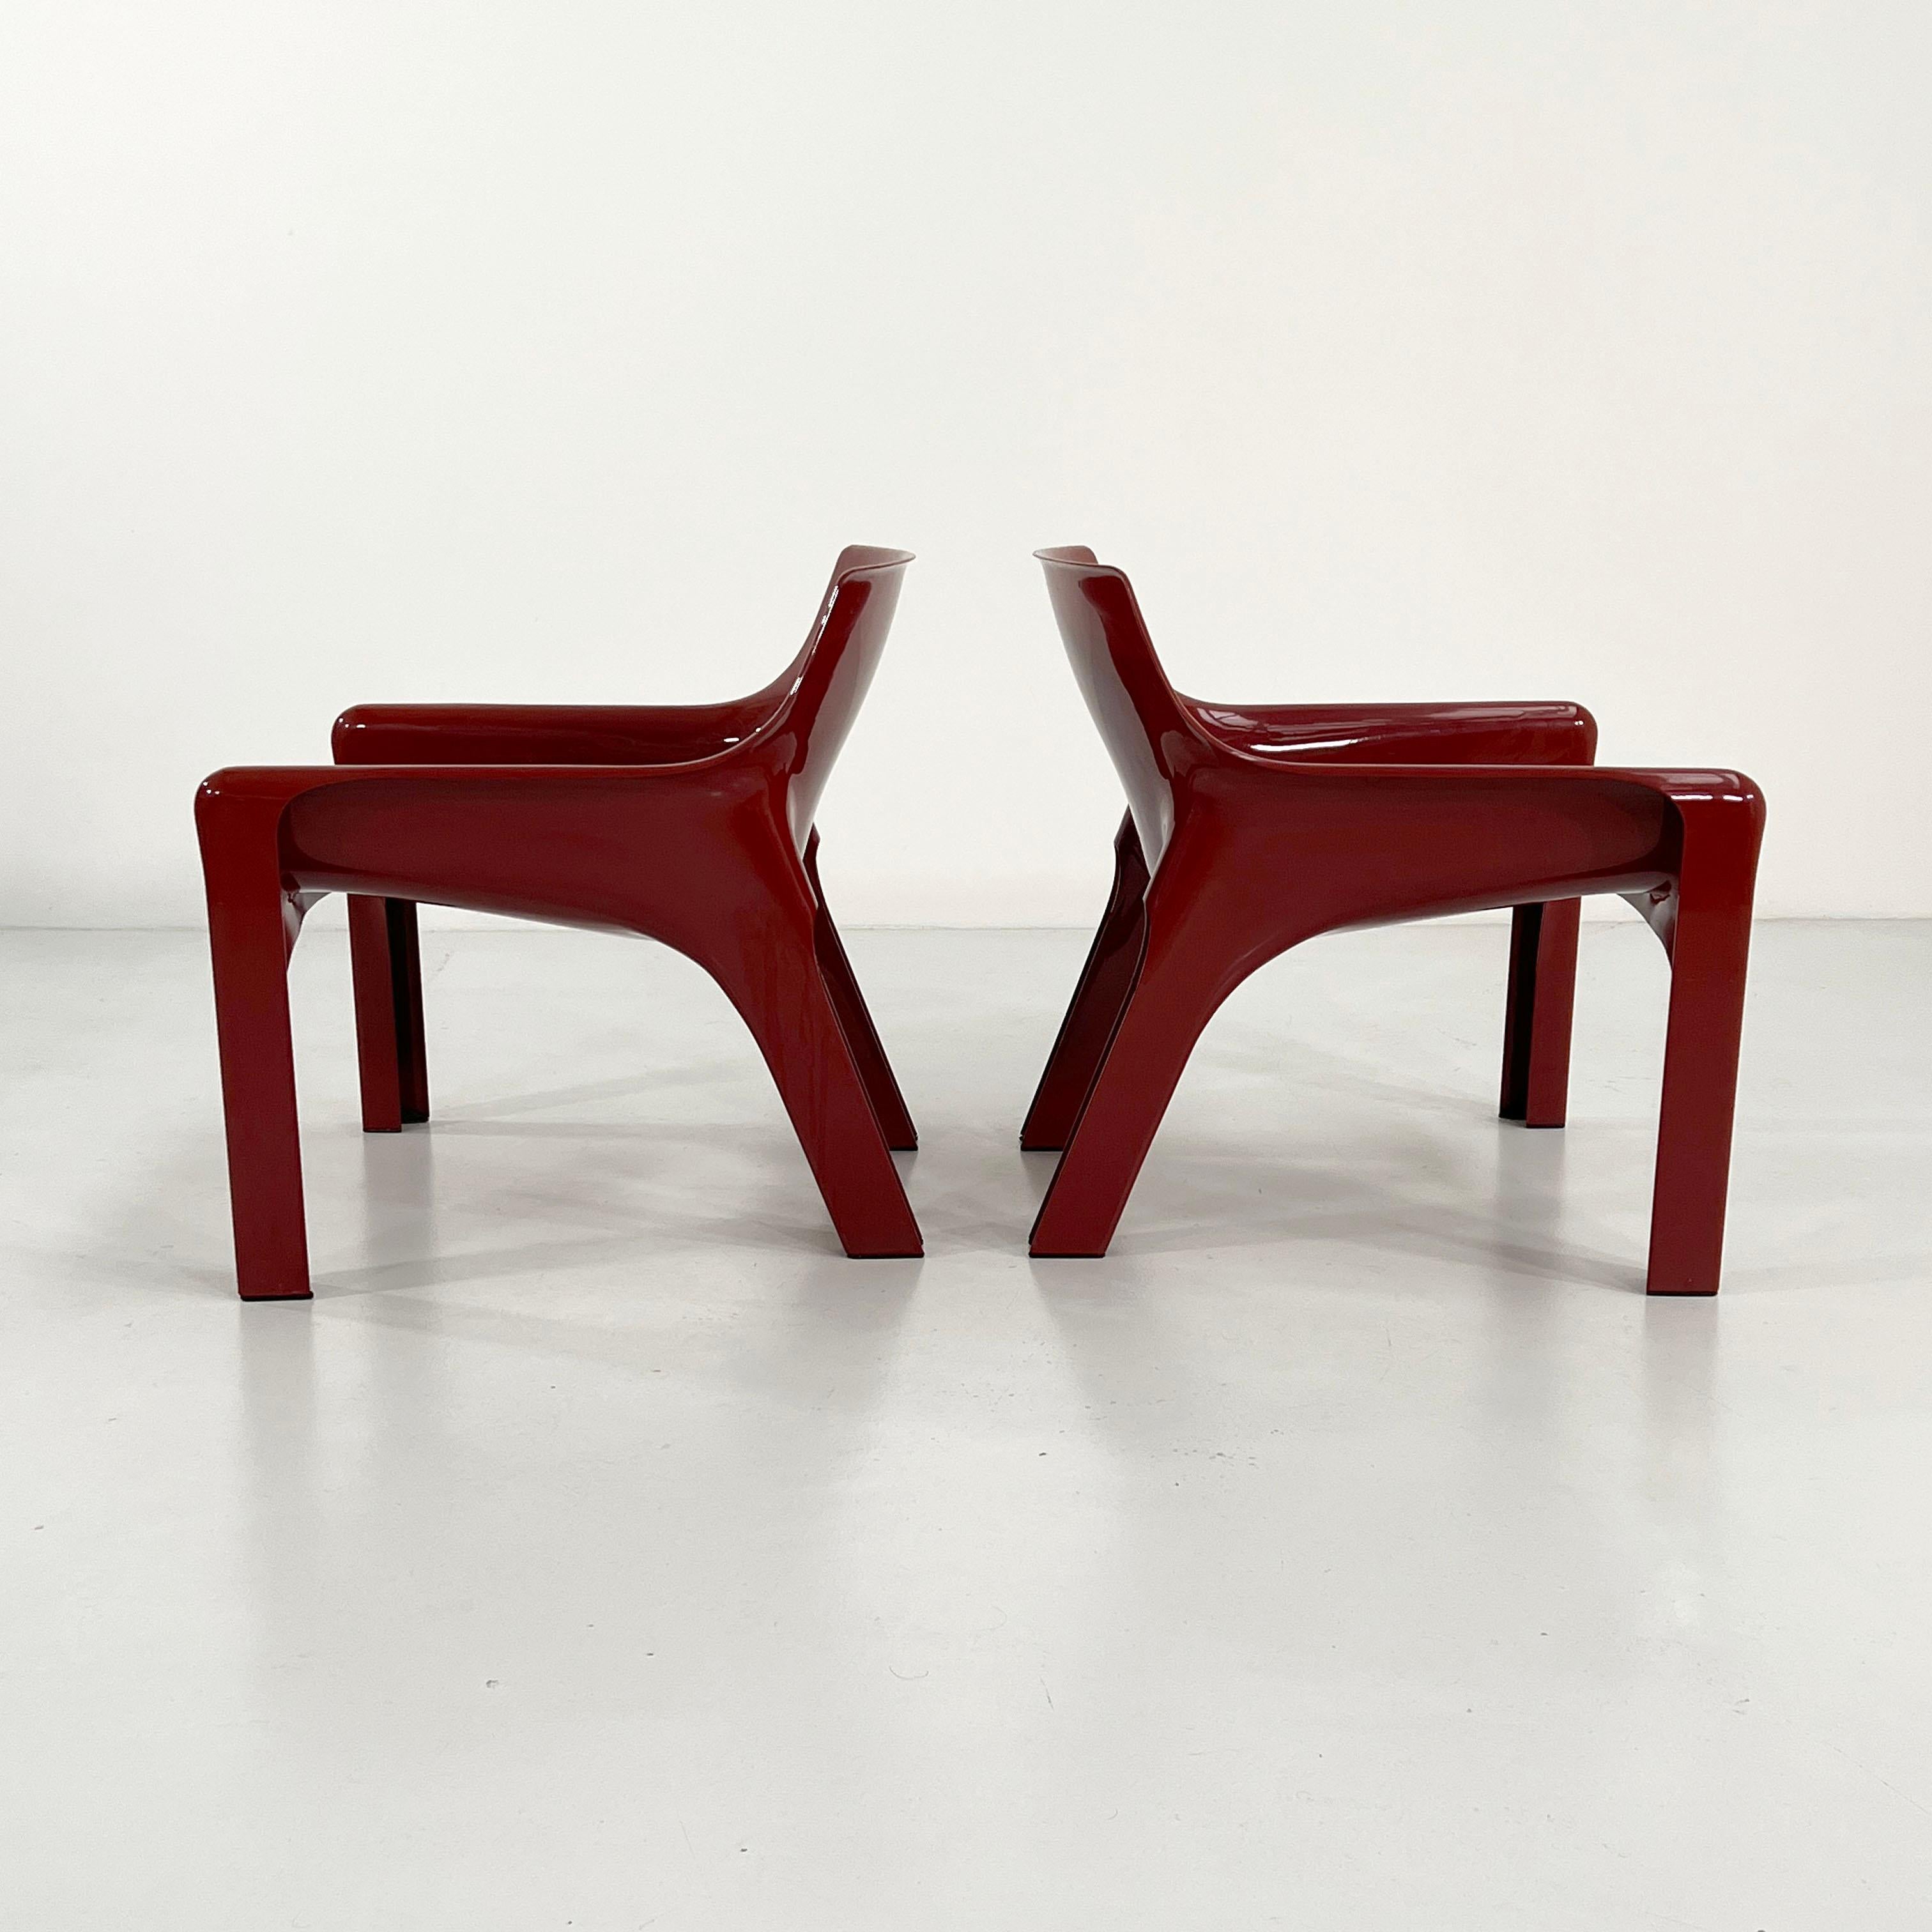 Italian Pair of Burgundy Vicario Lounge Chair by Vico Magistretti for Artemide, 1970s